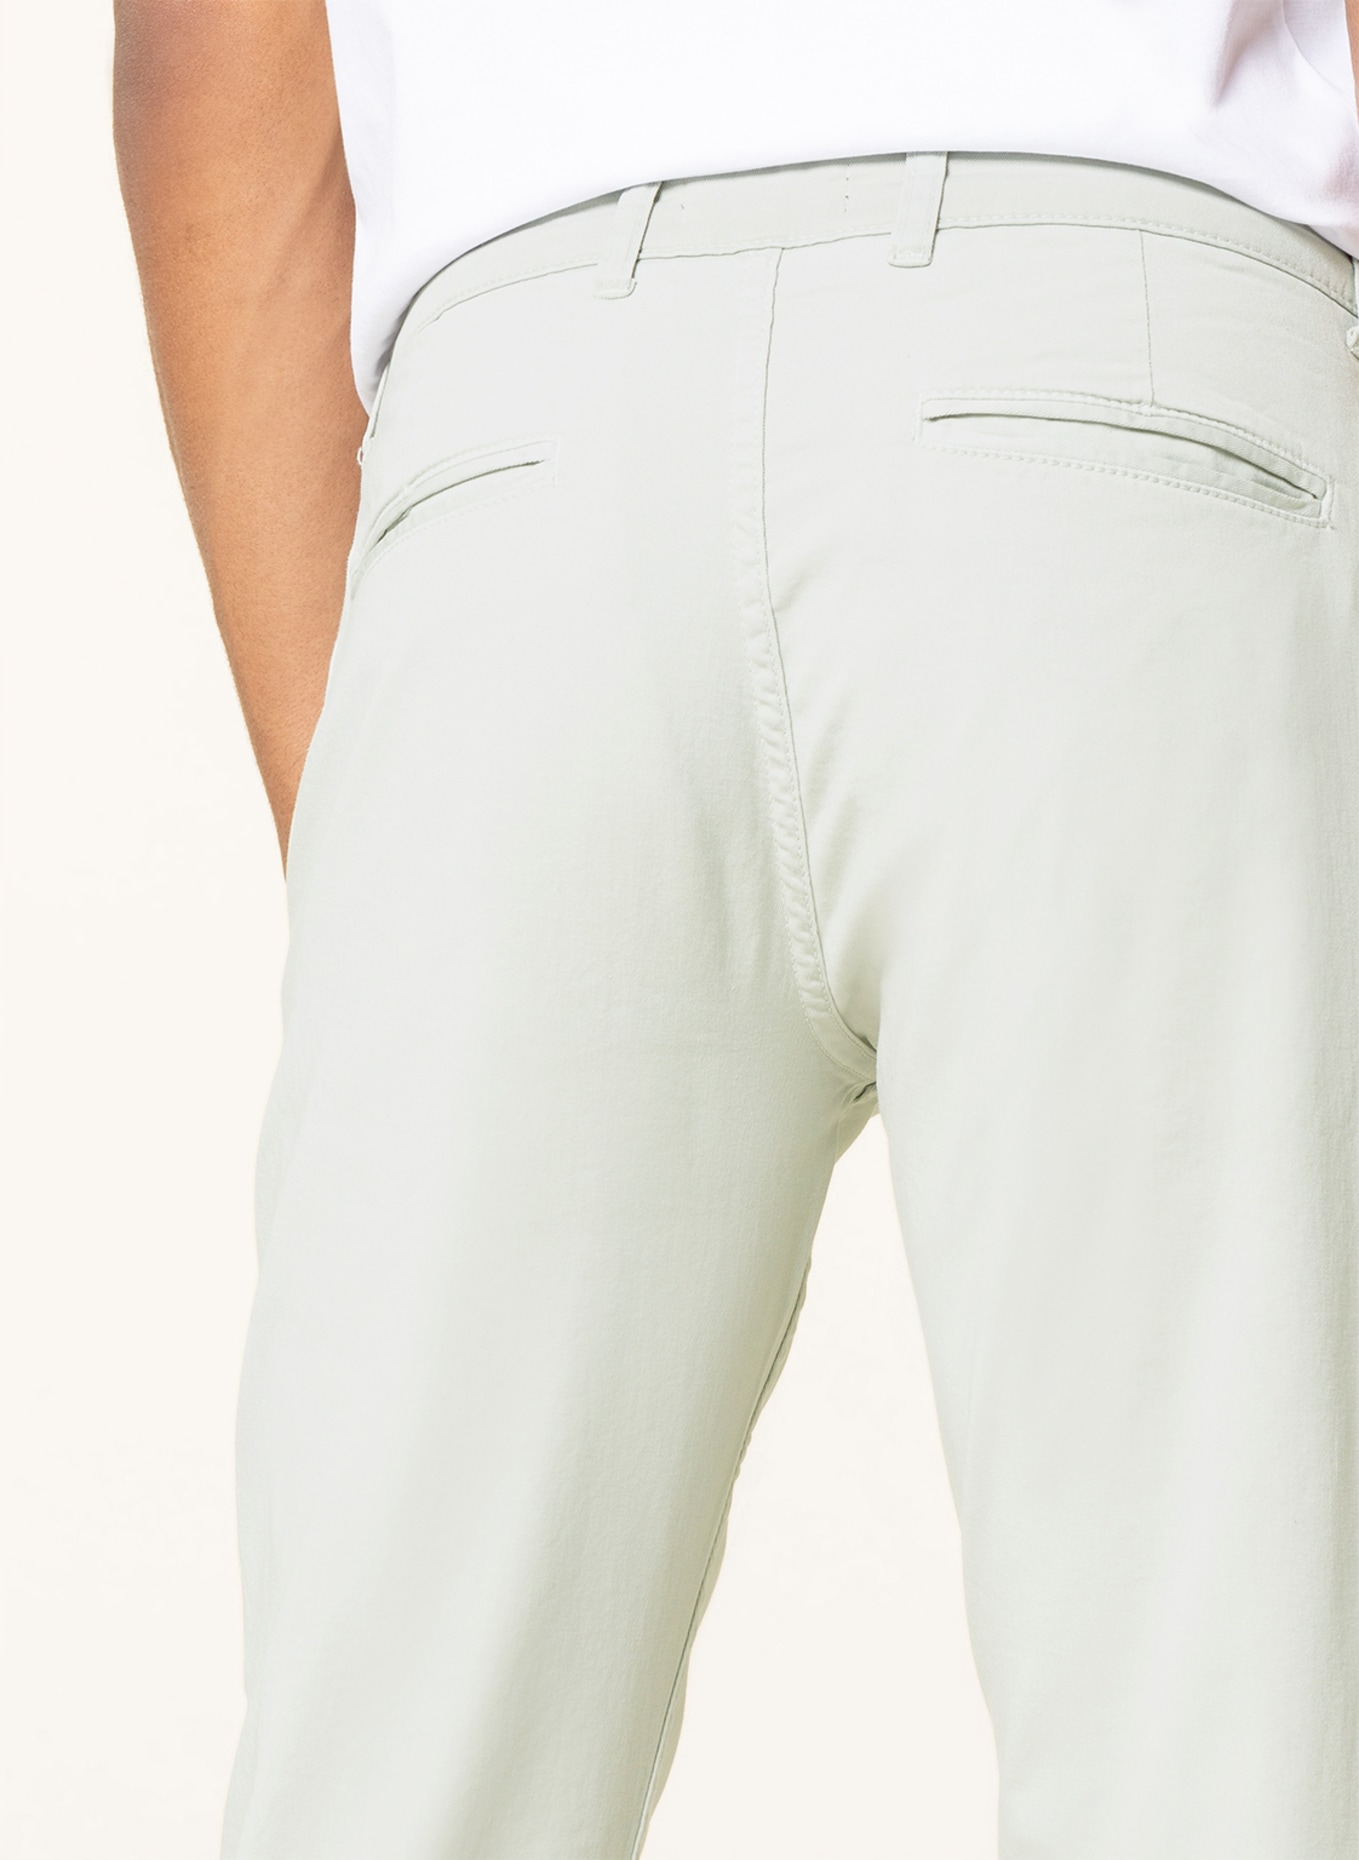 STROKESMAN'S Chinos Regular fit, Color: MINT (Image 5)